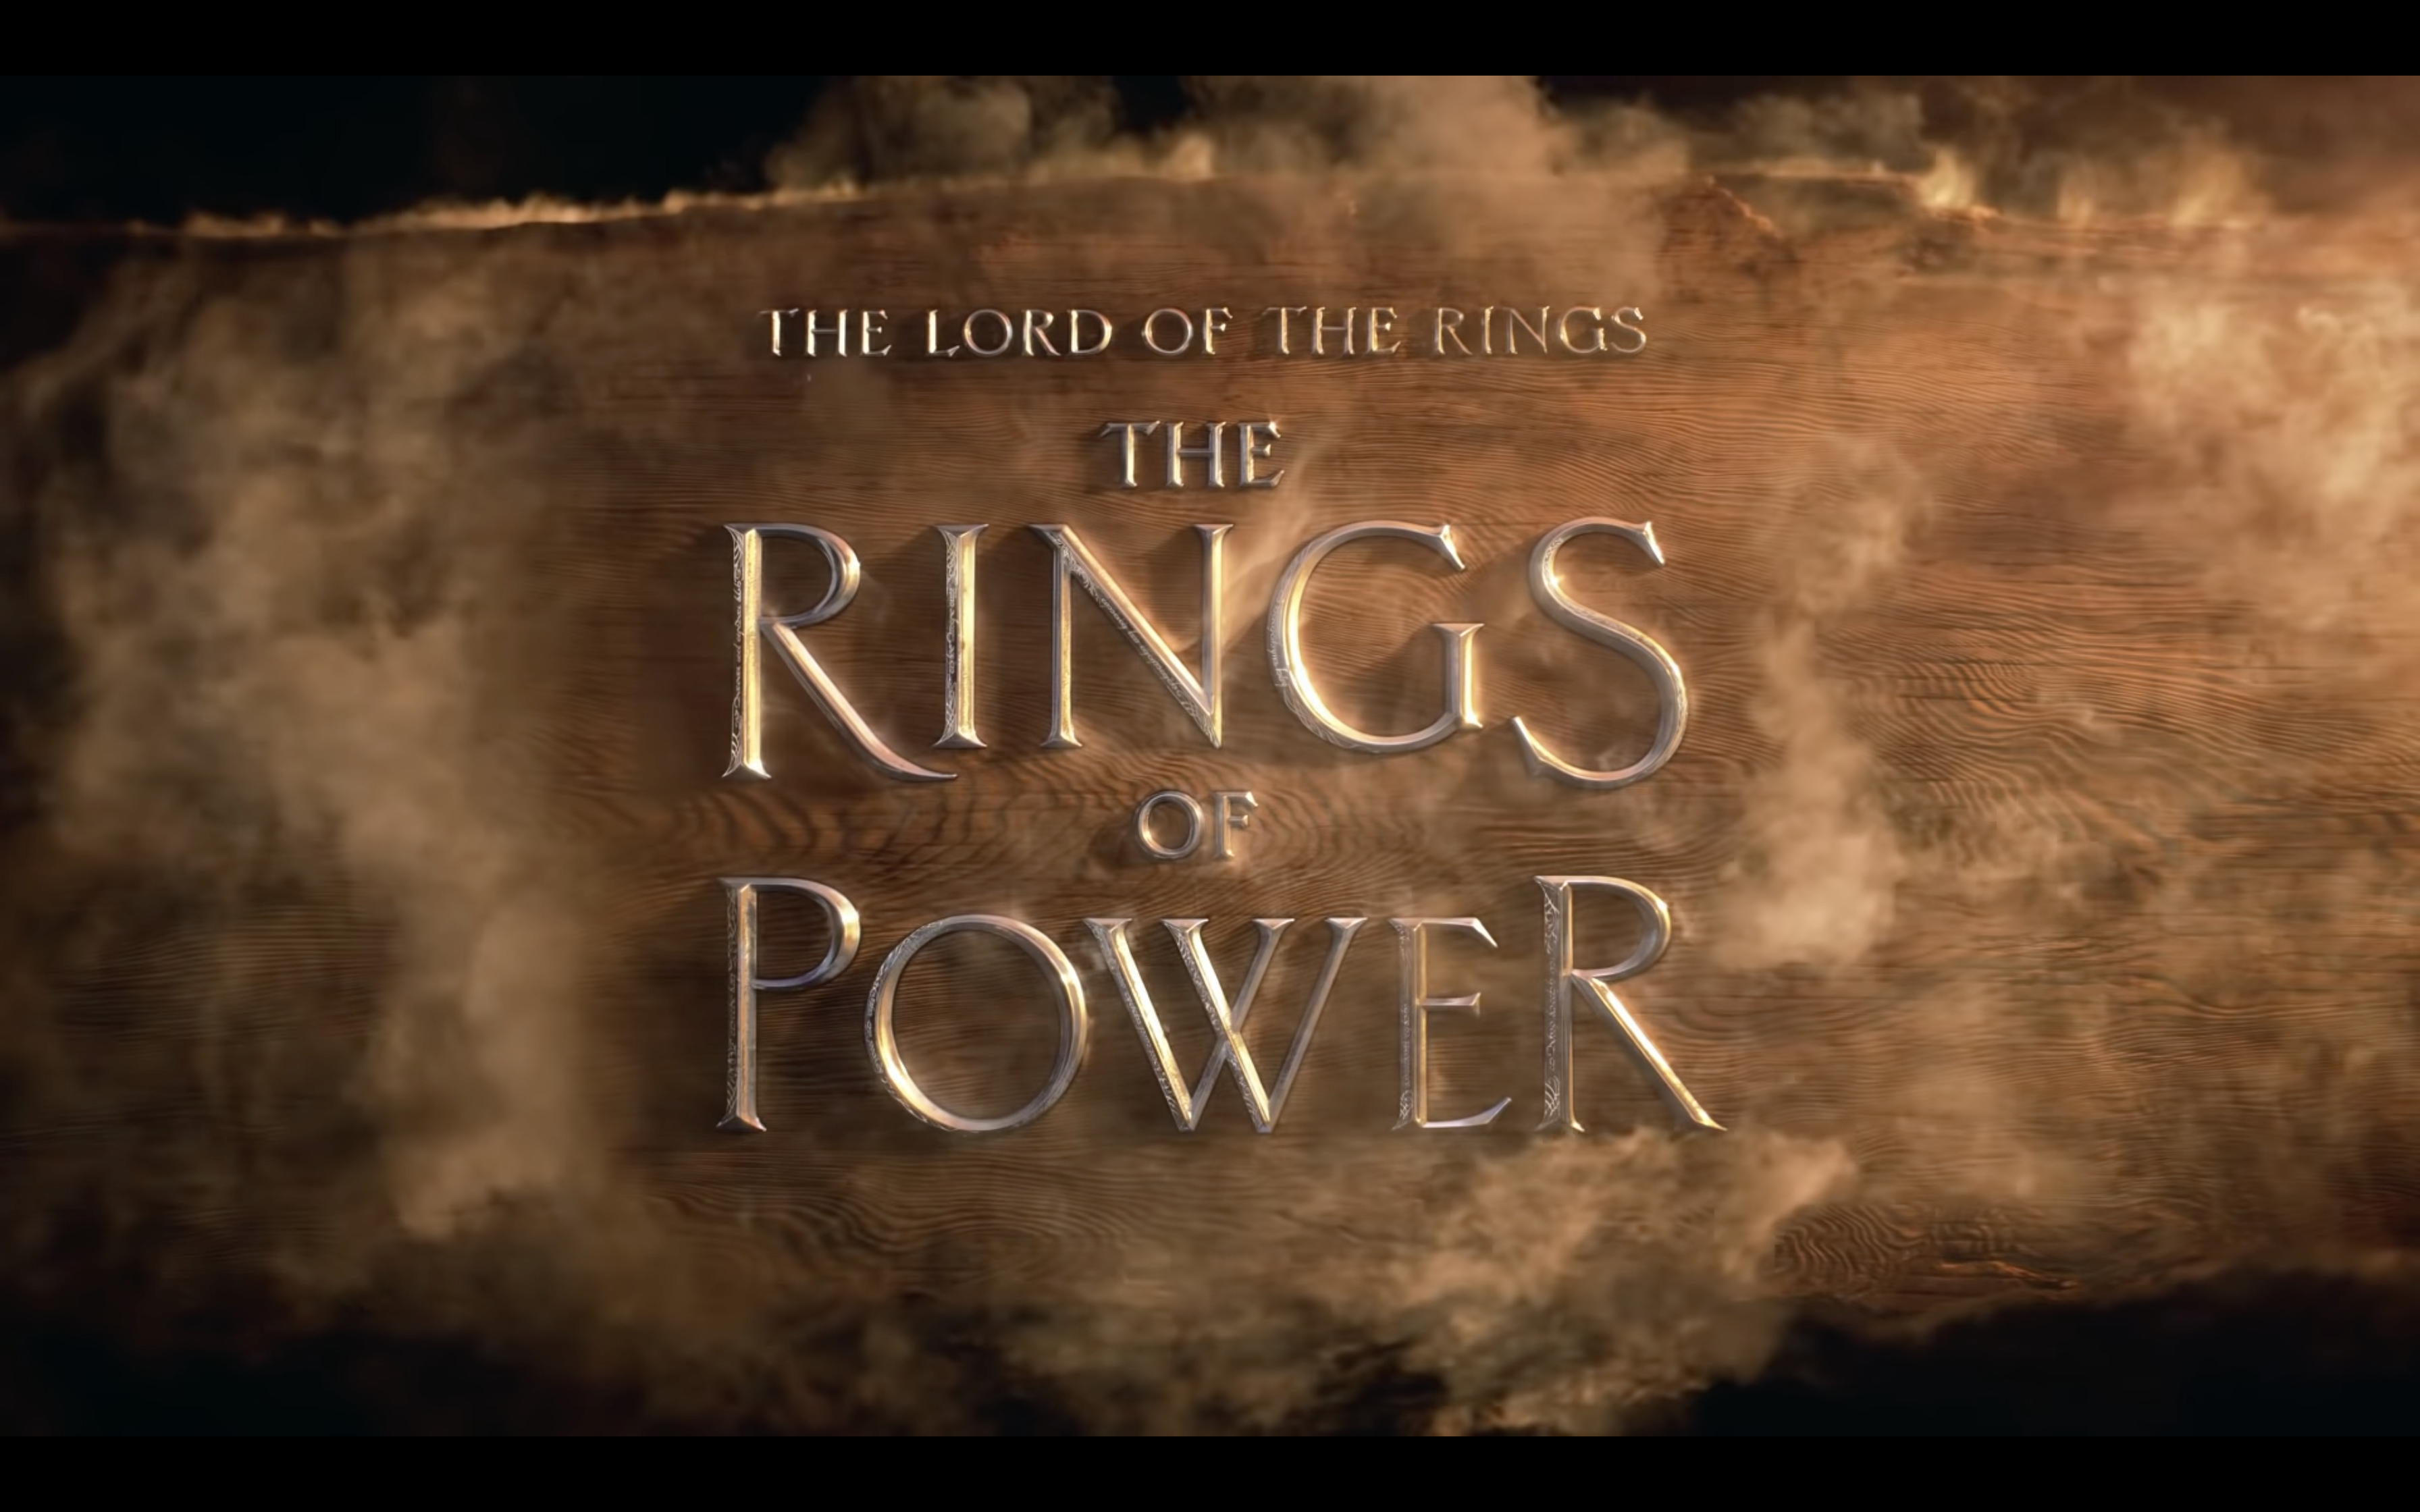 Amazon's 'Lord of the Rings: The Rings of Power' Is Boldly Going Where J.R.R. Tolkien Didn't